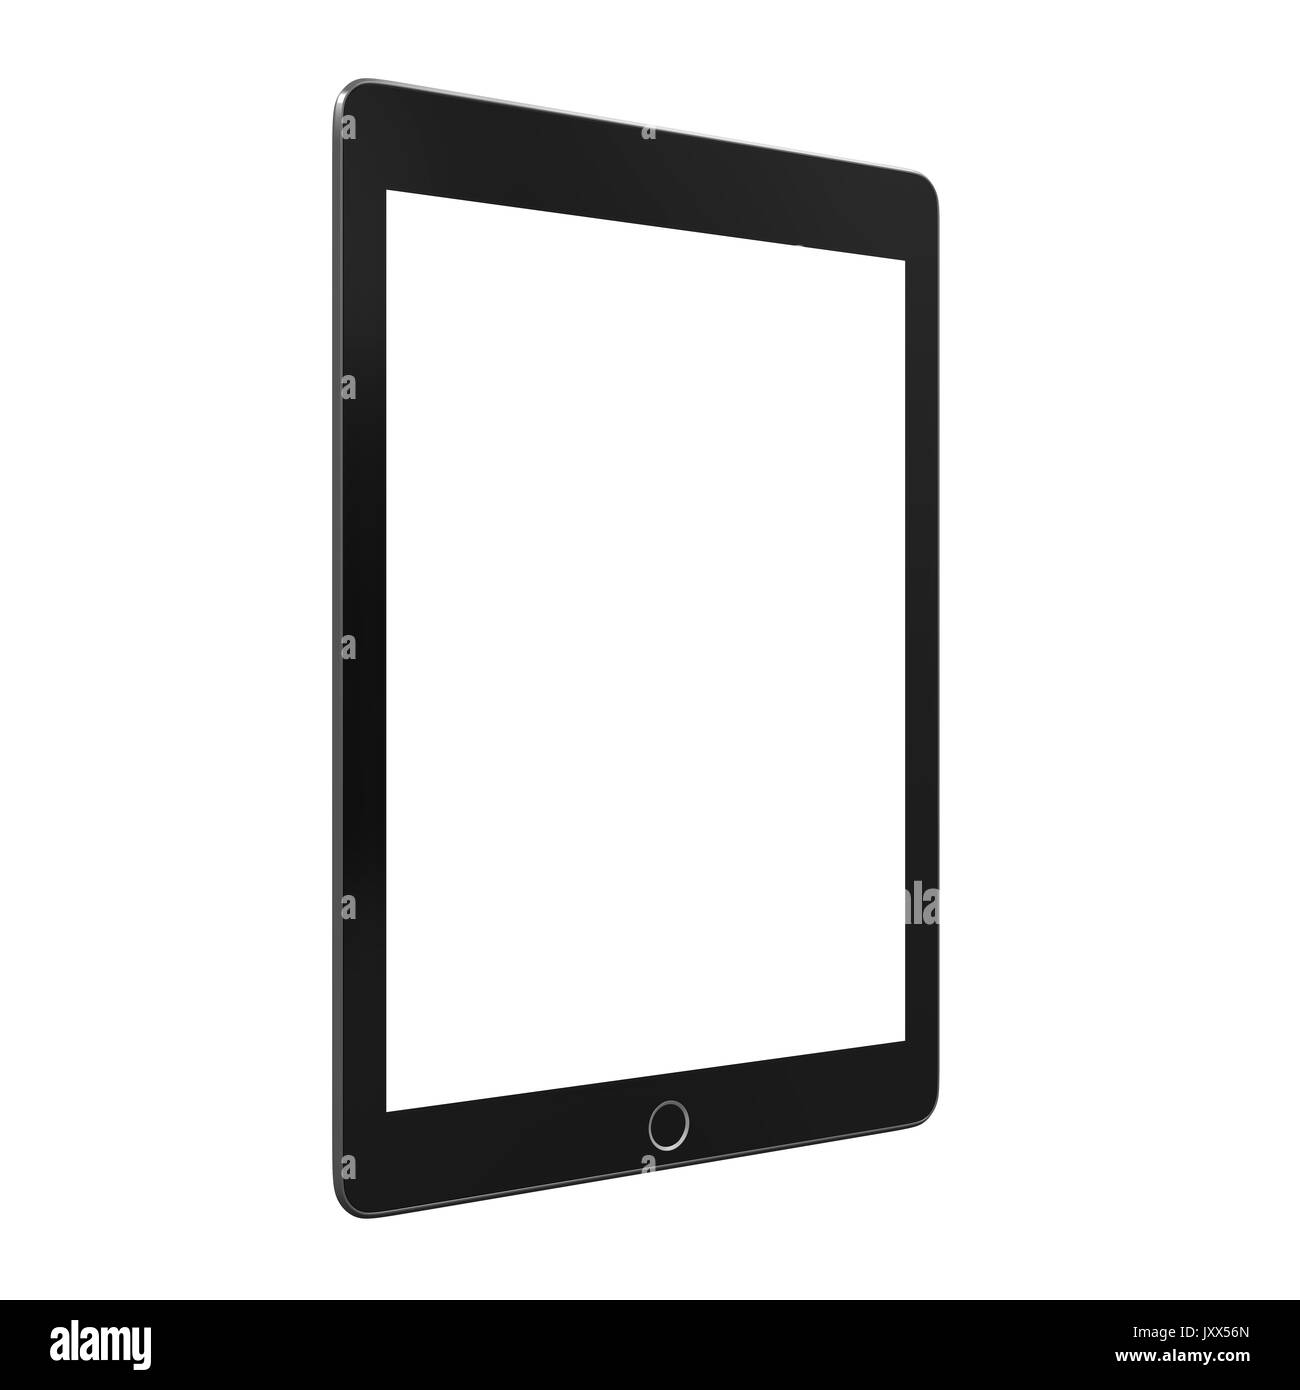 Computer Tablet Isolated Stock Photo